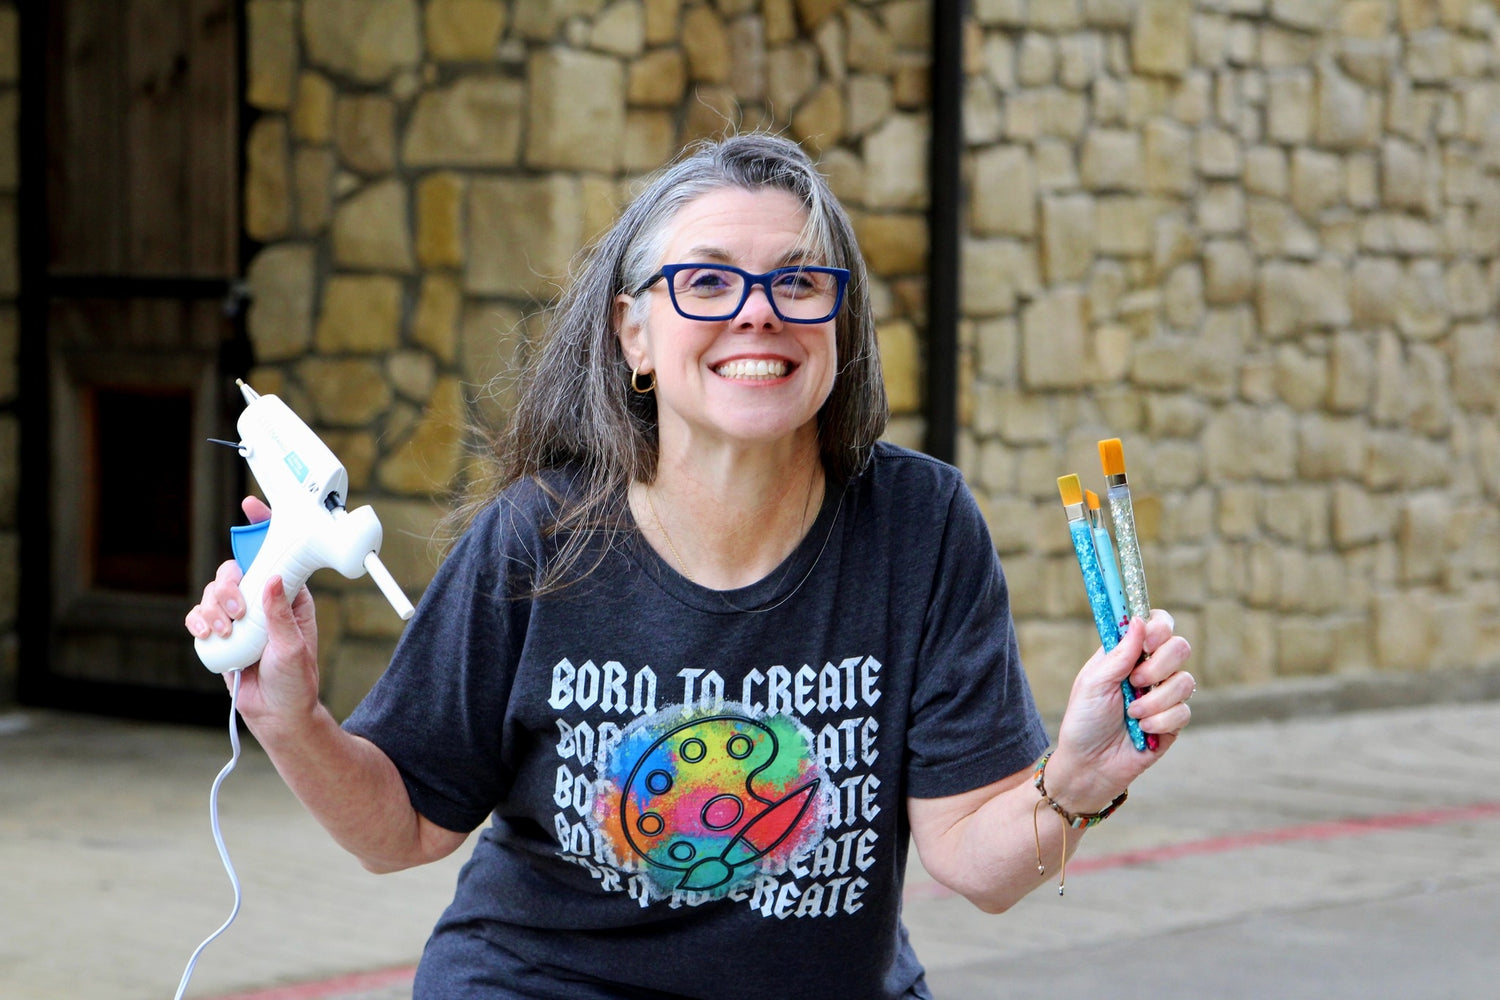 Amie (Deep In The Arts Creations owner) poses with a smile in a black T-Shirt with born to create printed on it five times. The words have a paint pallet over it with a tie-died type of pattern using colors of blue, yellow, green, red, aqua, orange, and pink. She is holding a glue gun in her right hand and three paint brushes in her left. 